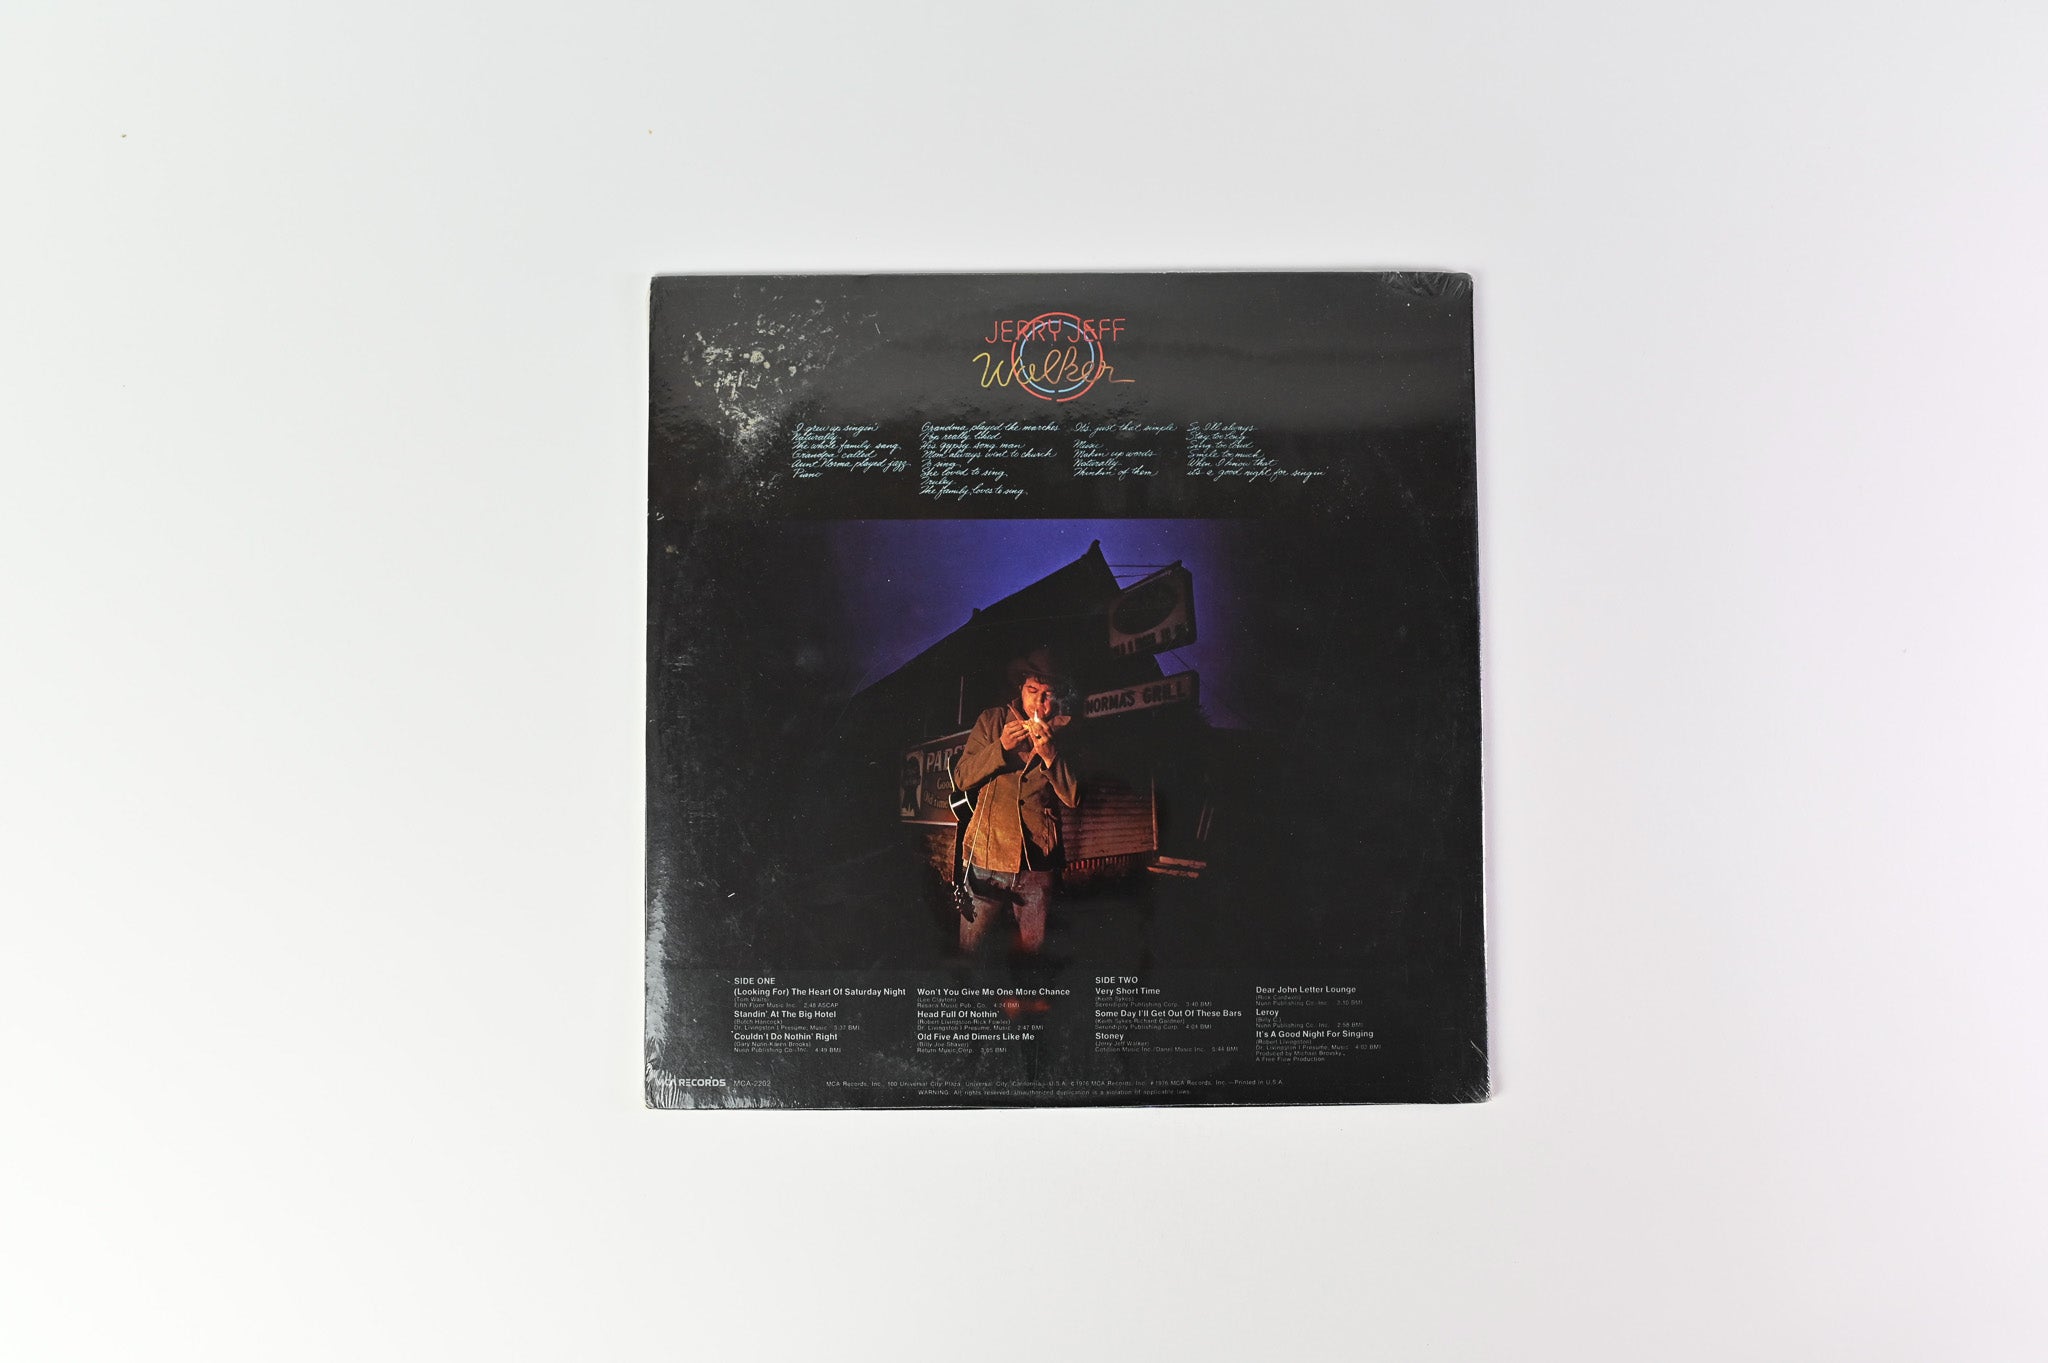 Jerry Jeff Walker - It's A Good Night For Singin' on MCA Sealed